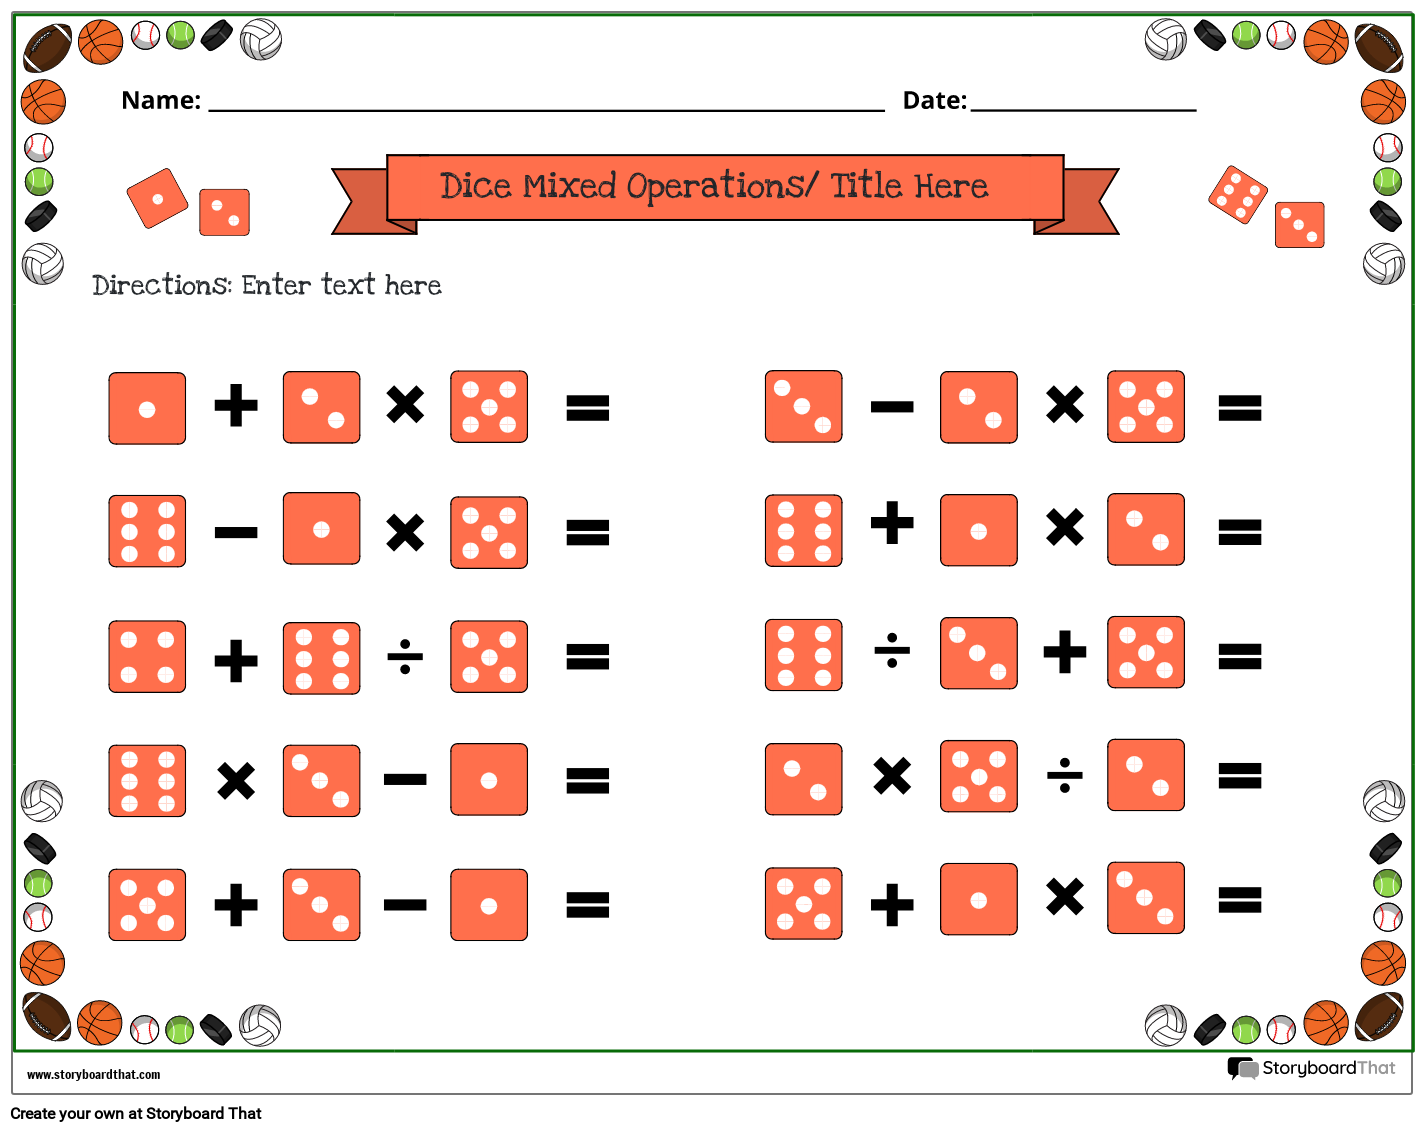 Mixed operations worksheet with dice